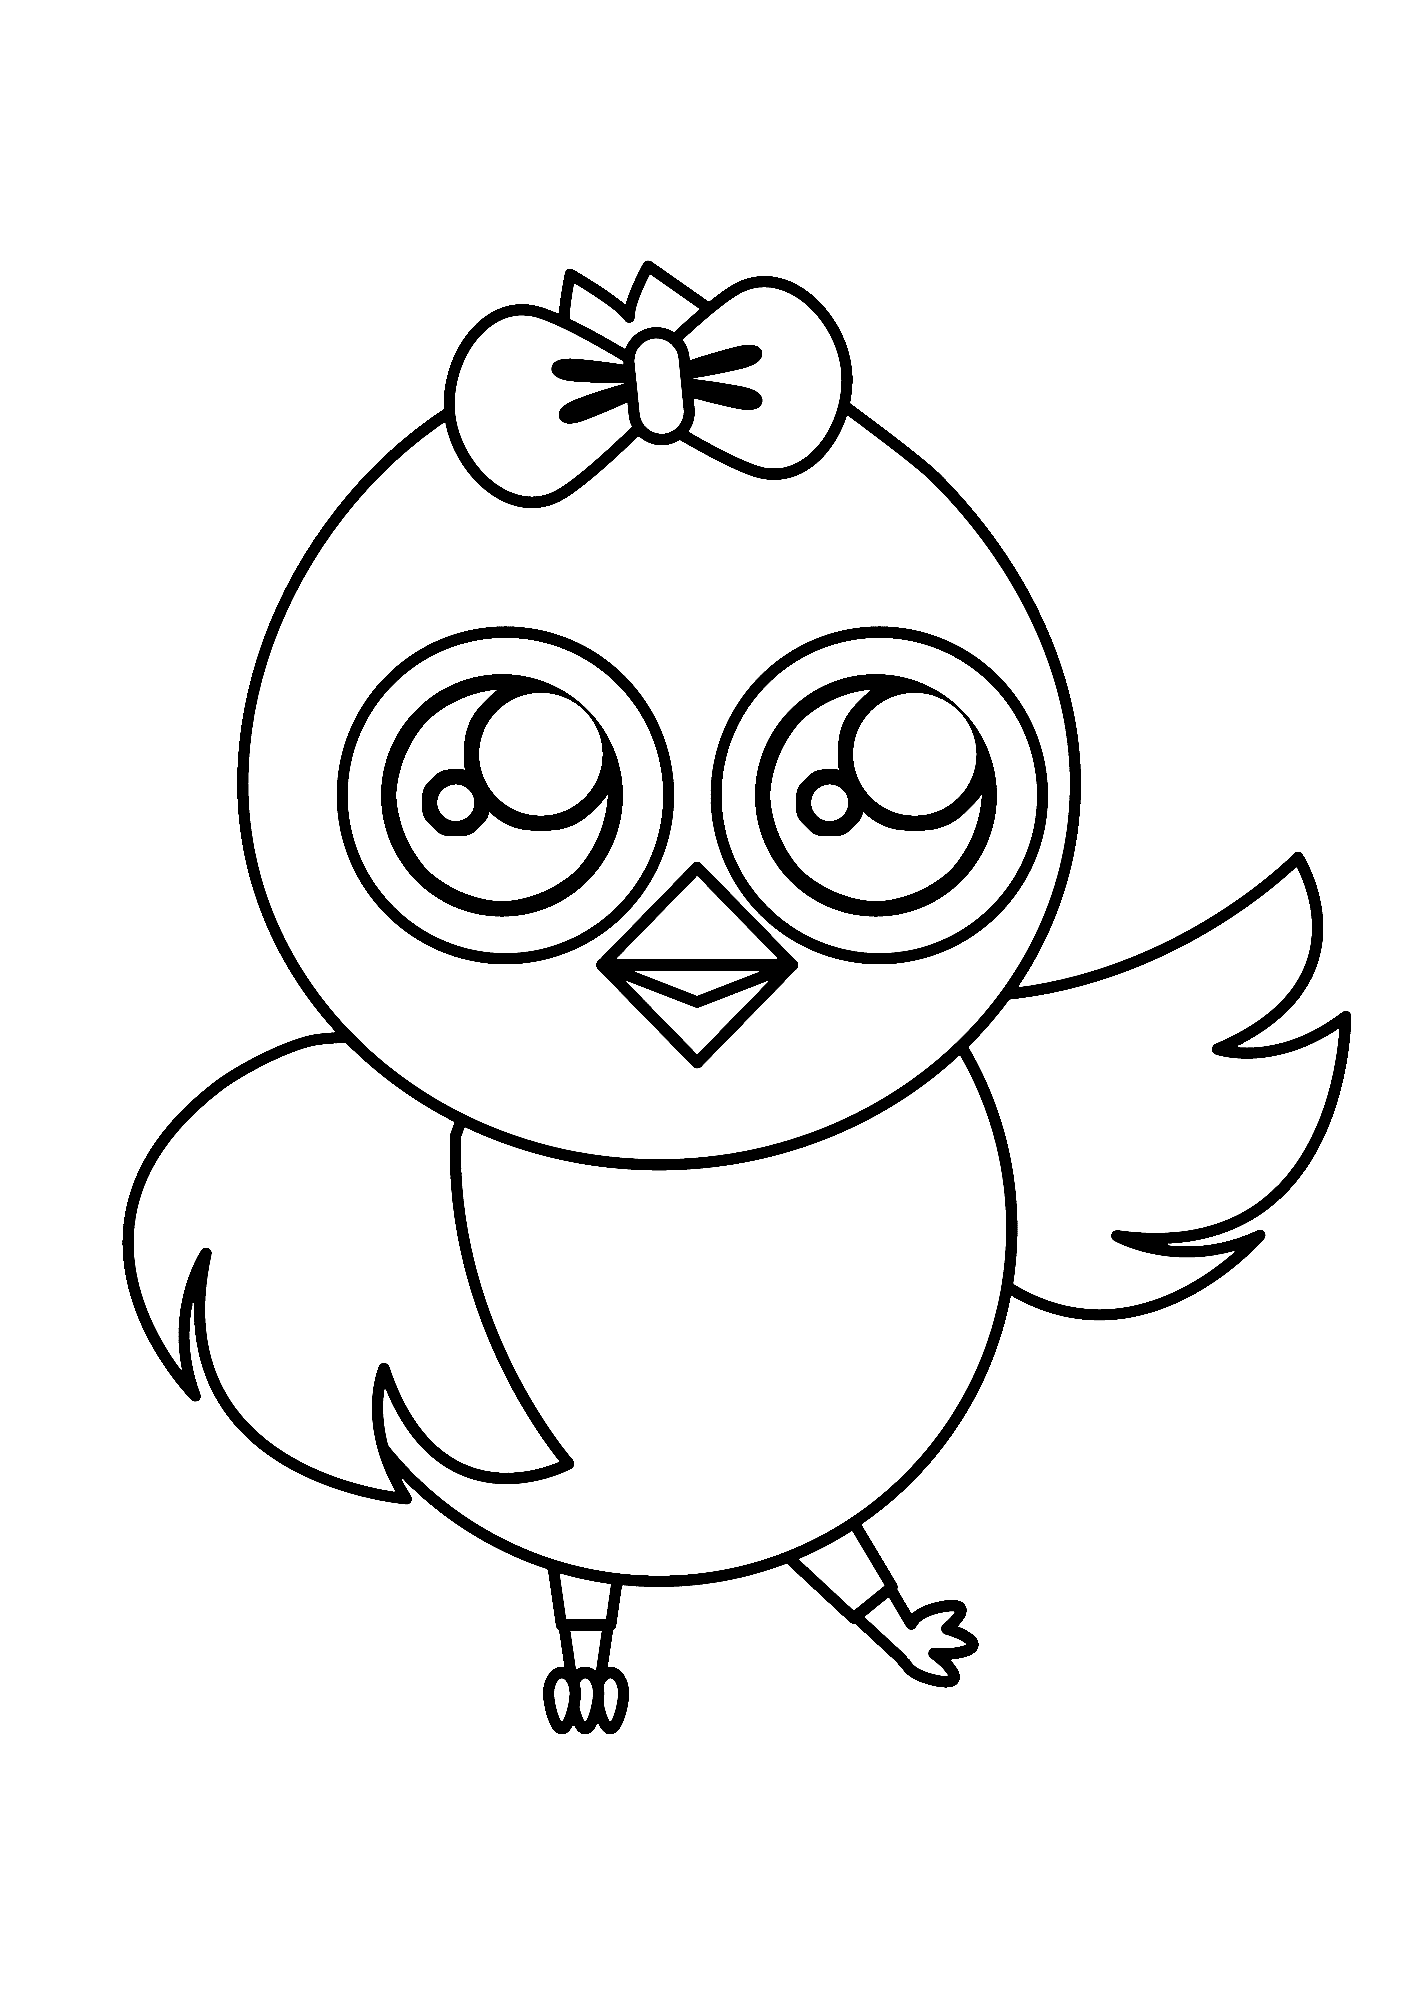 Chick Smile Coloring Page